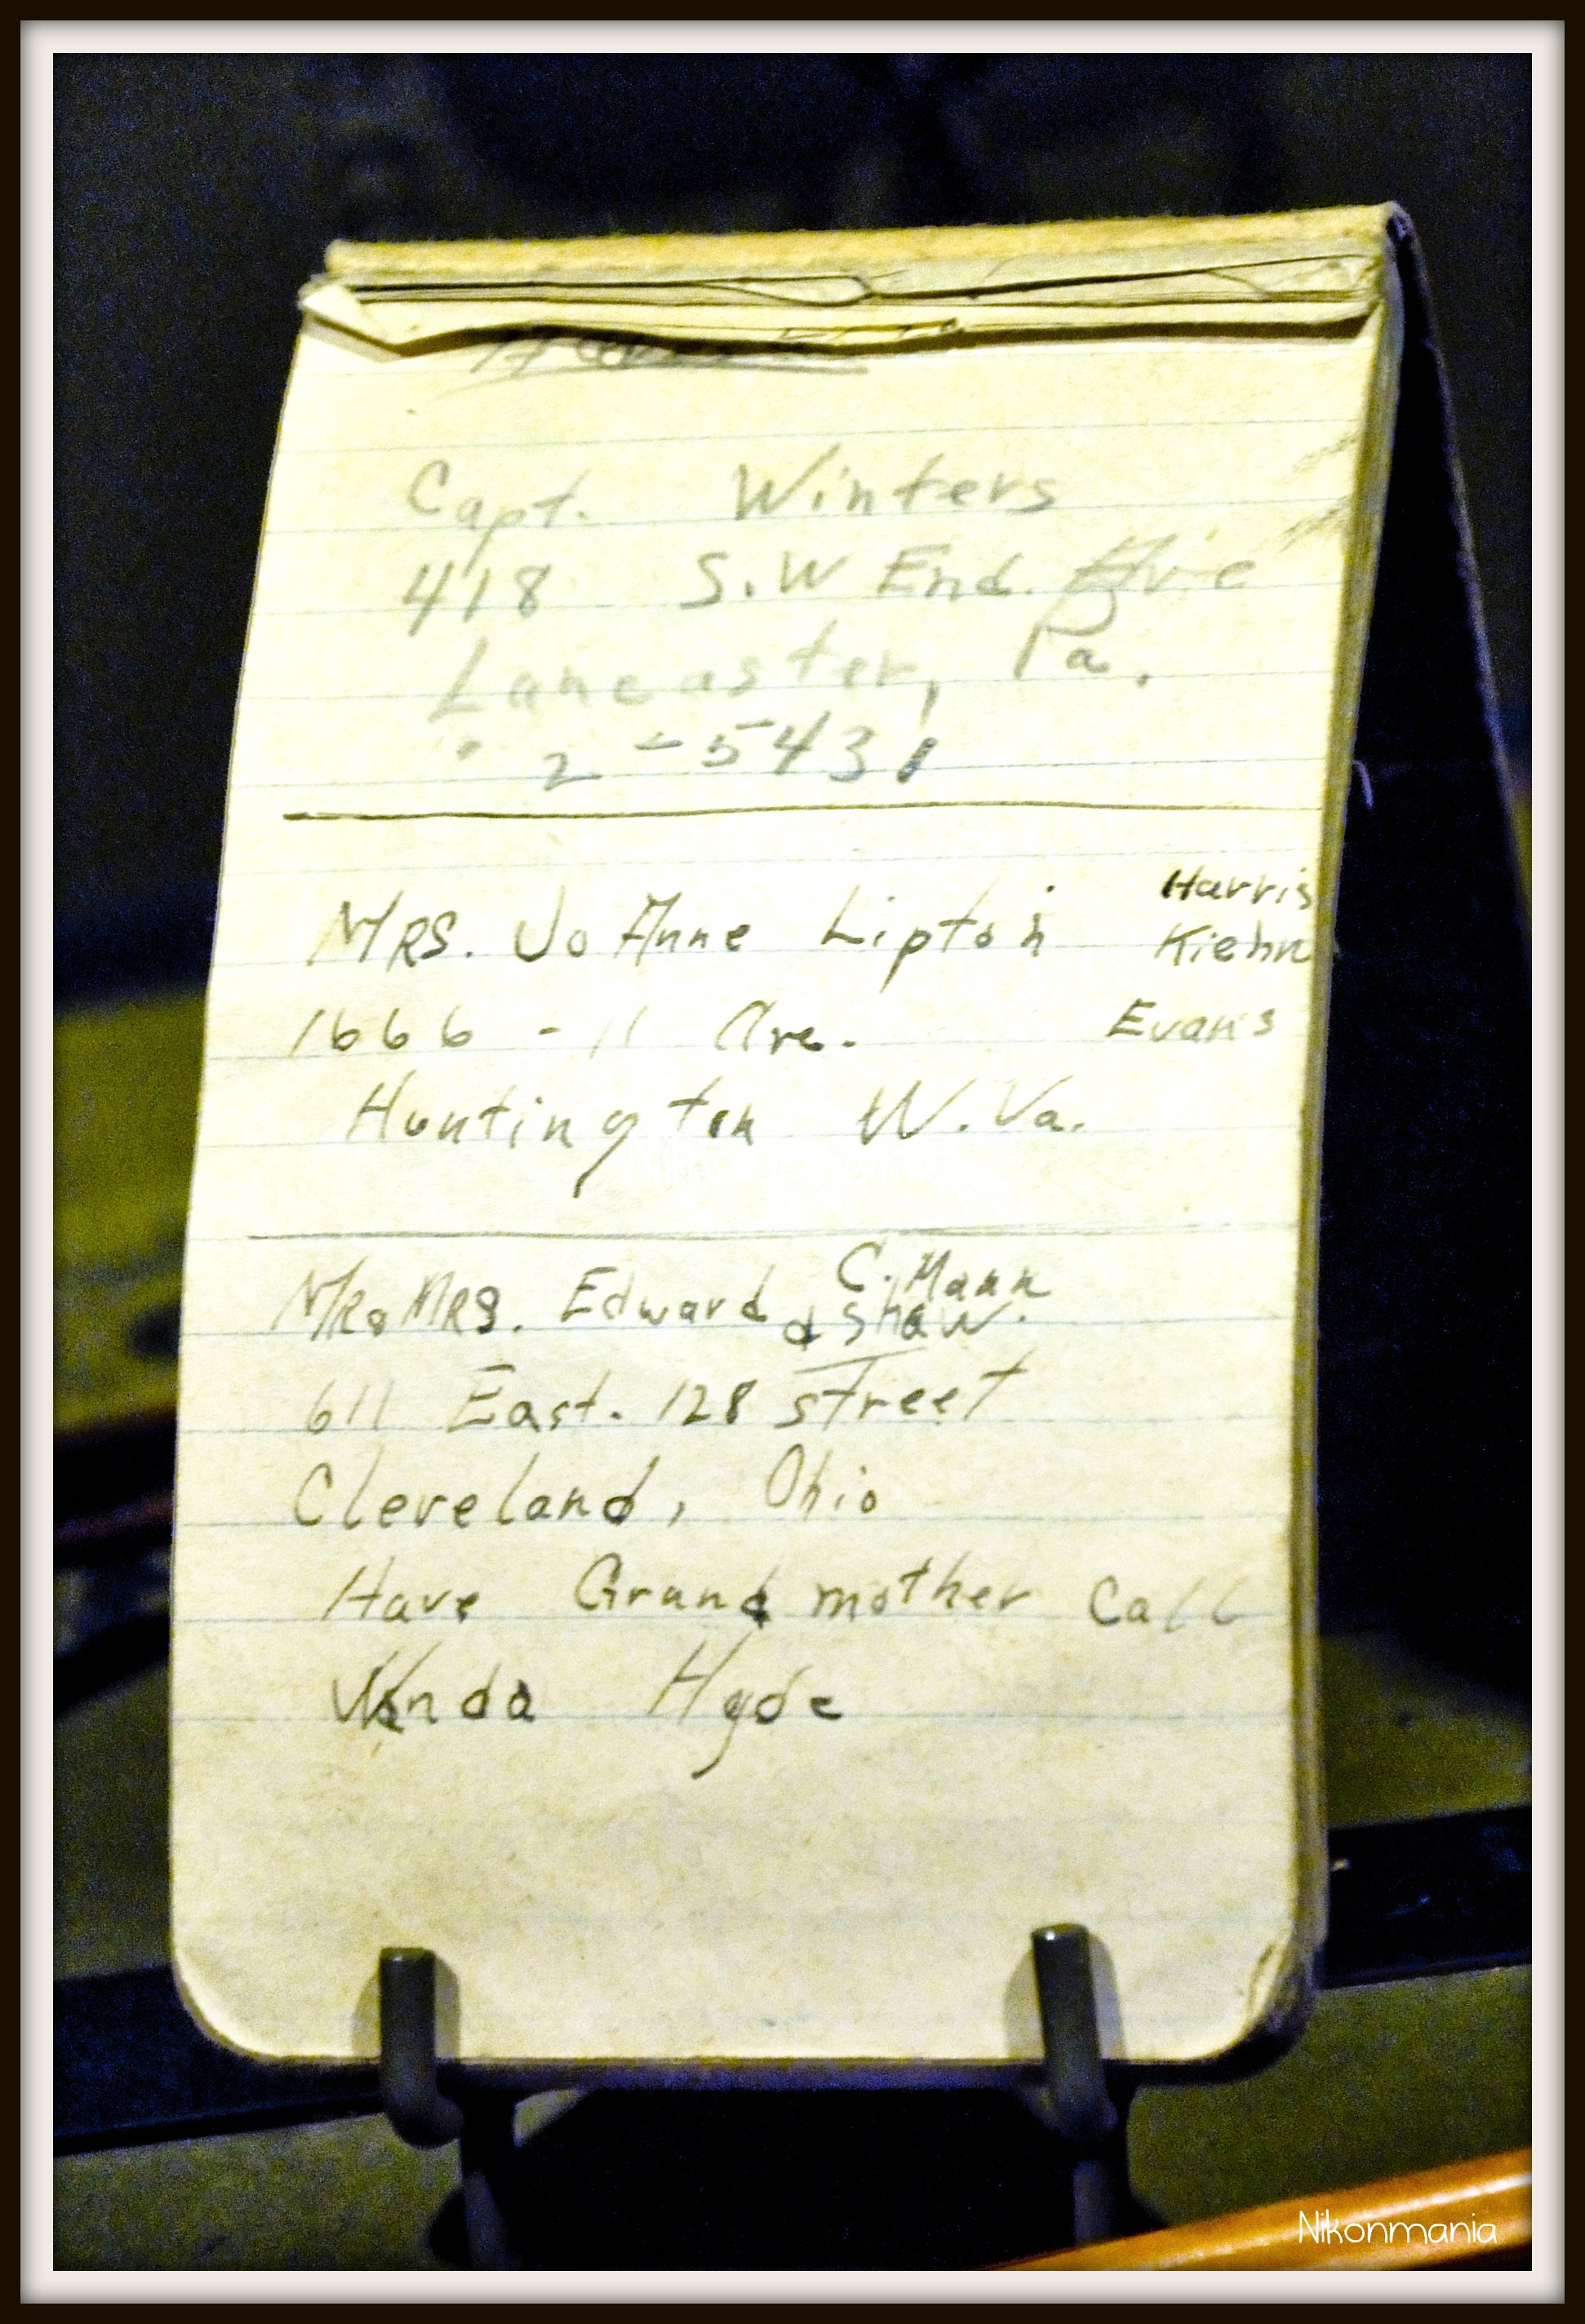 Major Dick Winter's notebook. On display at Dead Man's Corner, the approach to Carentan in Normandy